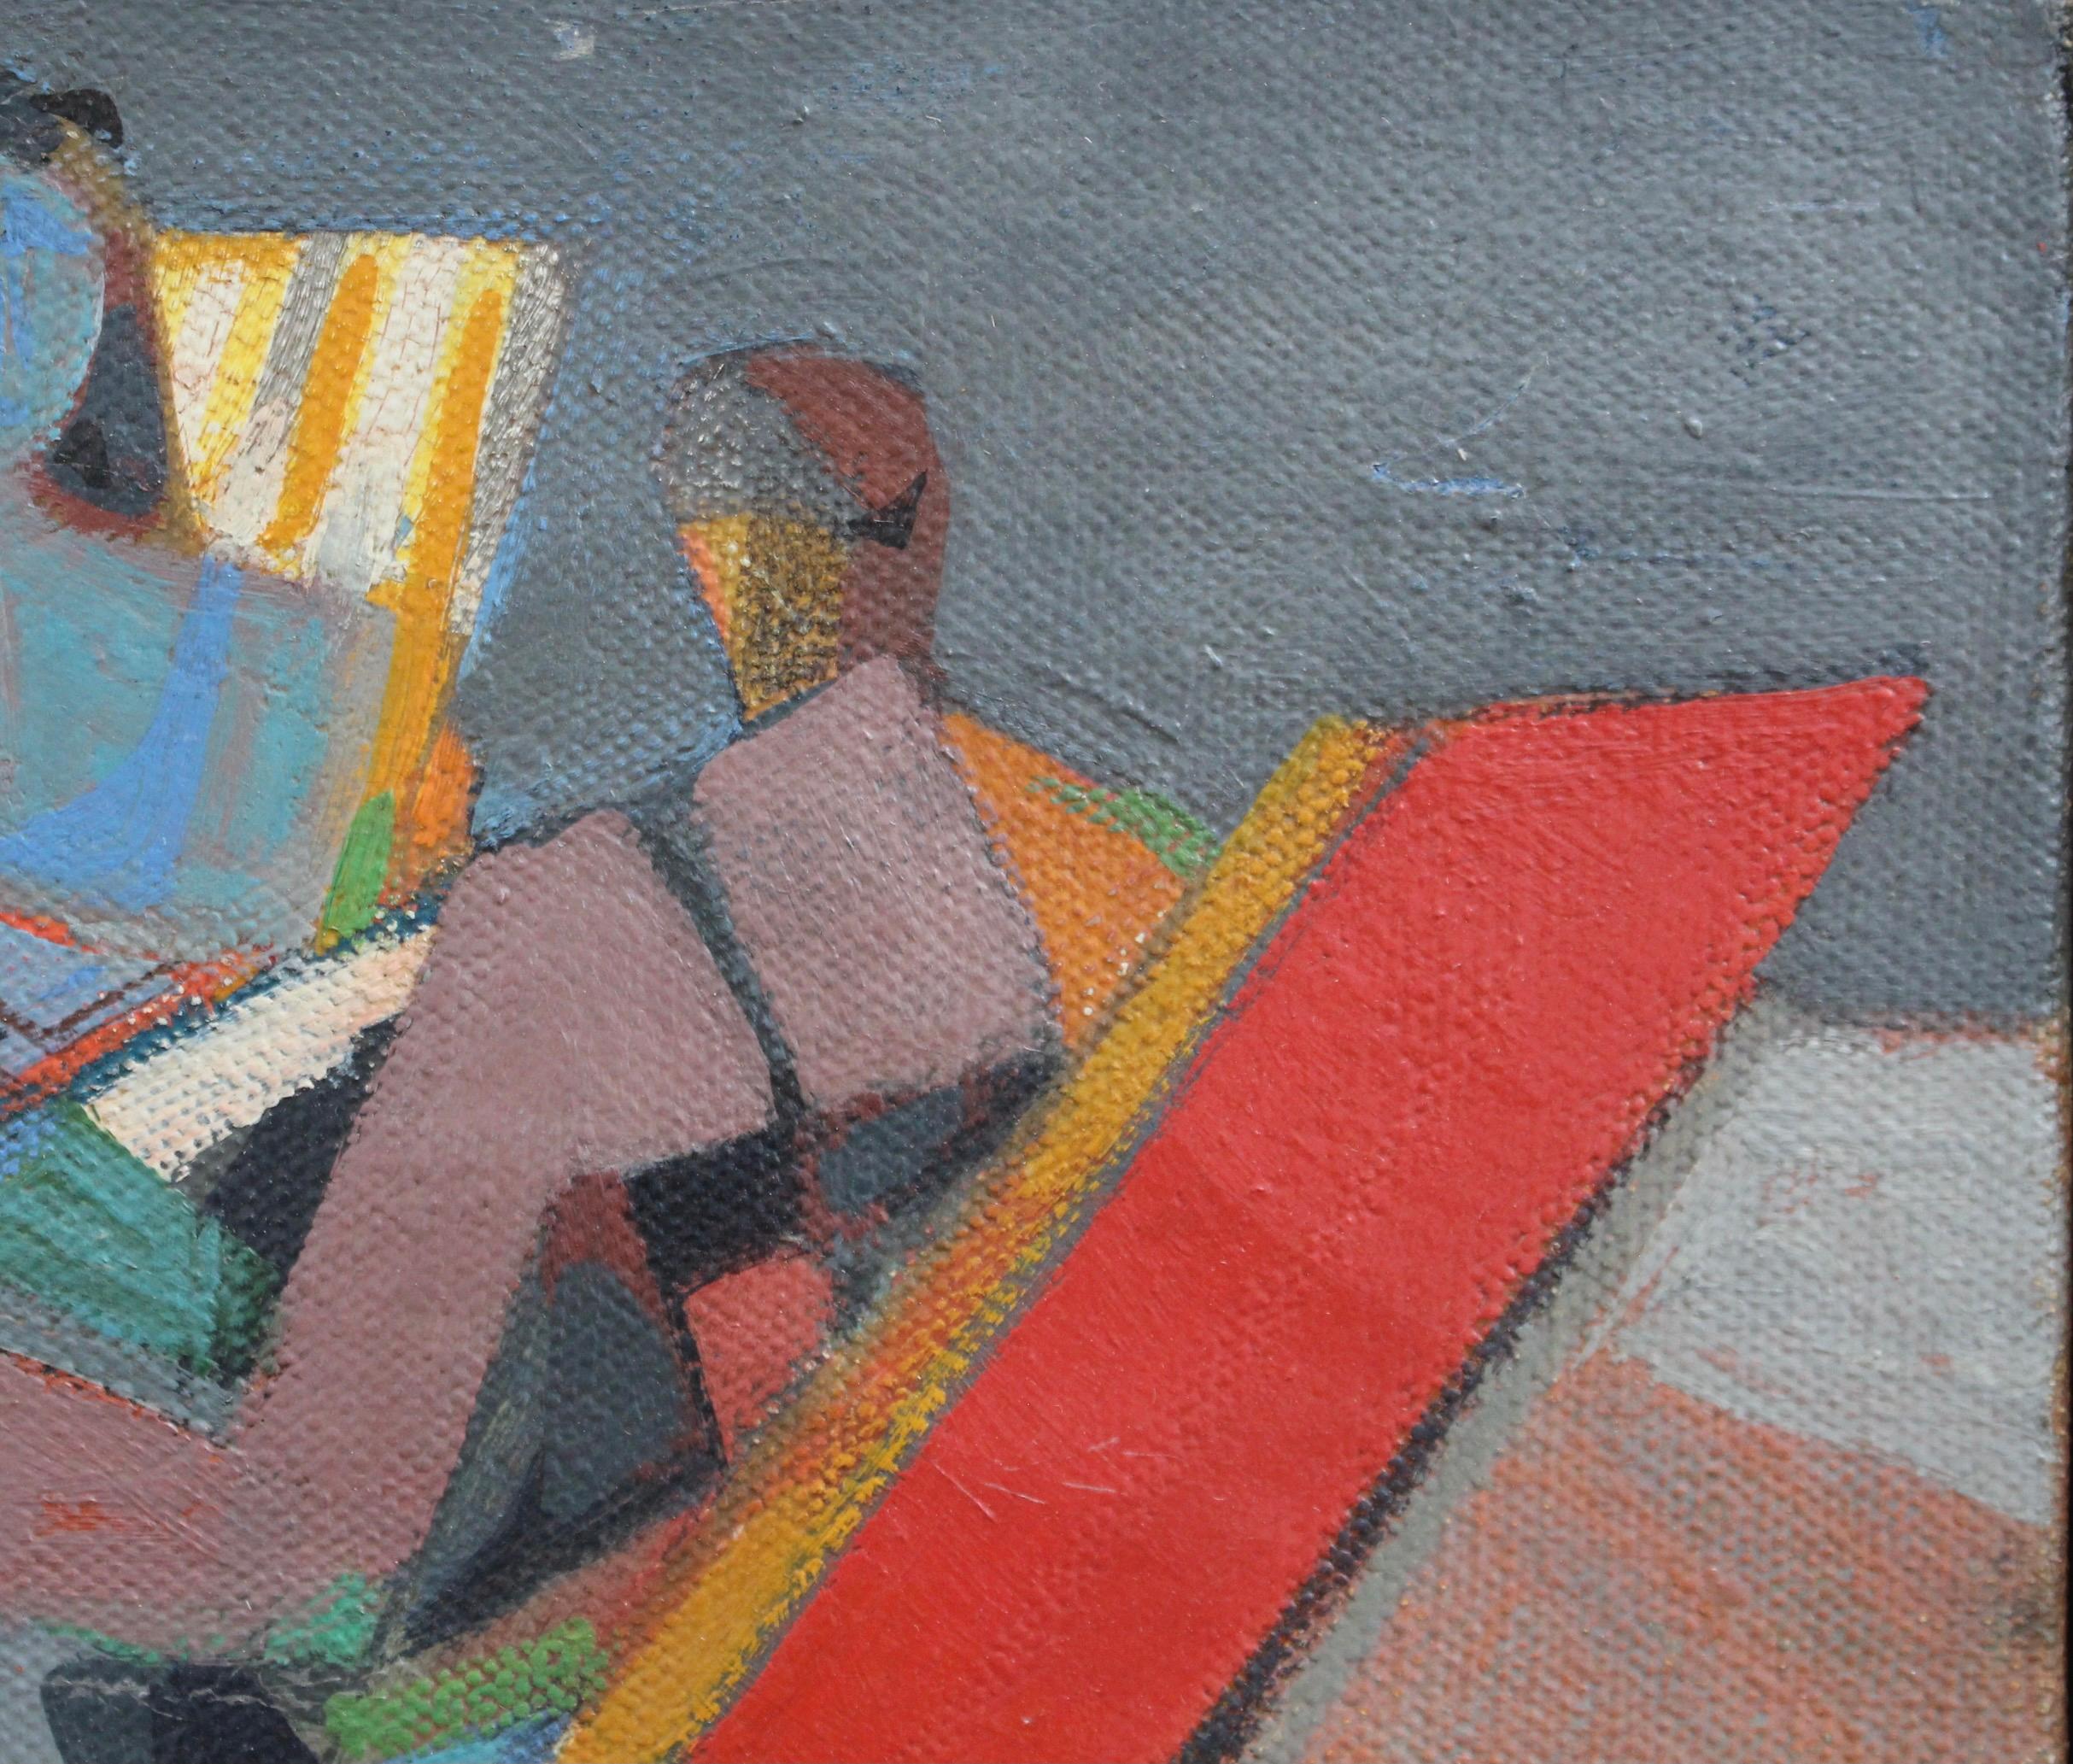 'Women in Deckchairs', oil on canvas, by Camille Hilaire (circa 1960s). Folding wooden chairs with woven or cane seats and backs, of the type now known in the UK as 